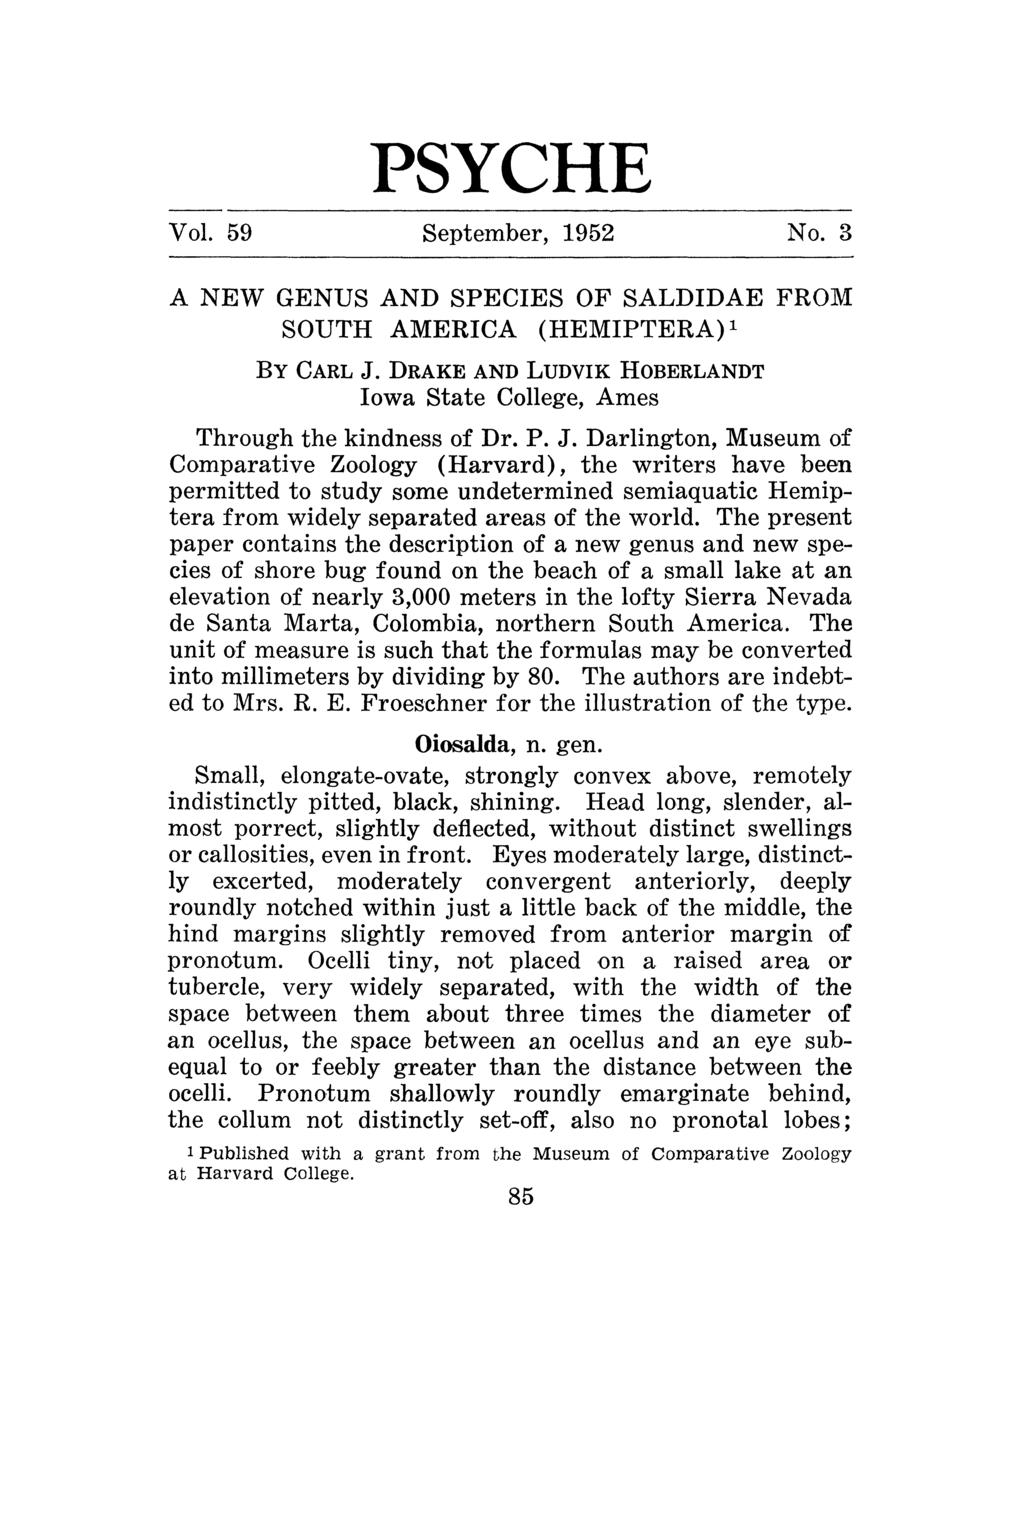 PSYCHE Vol. 59 September, 1952 No. 3 A NEW GENUS AND SPECIES OF SALDIDAE FROM SOUTH AMERICA (HEMIPTERA) BY CARL J. DRAKE AND LUDVIK HOBERLANDT Iowa State College, Ames Through the kindness of Dr. P.